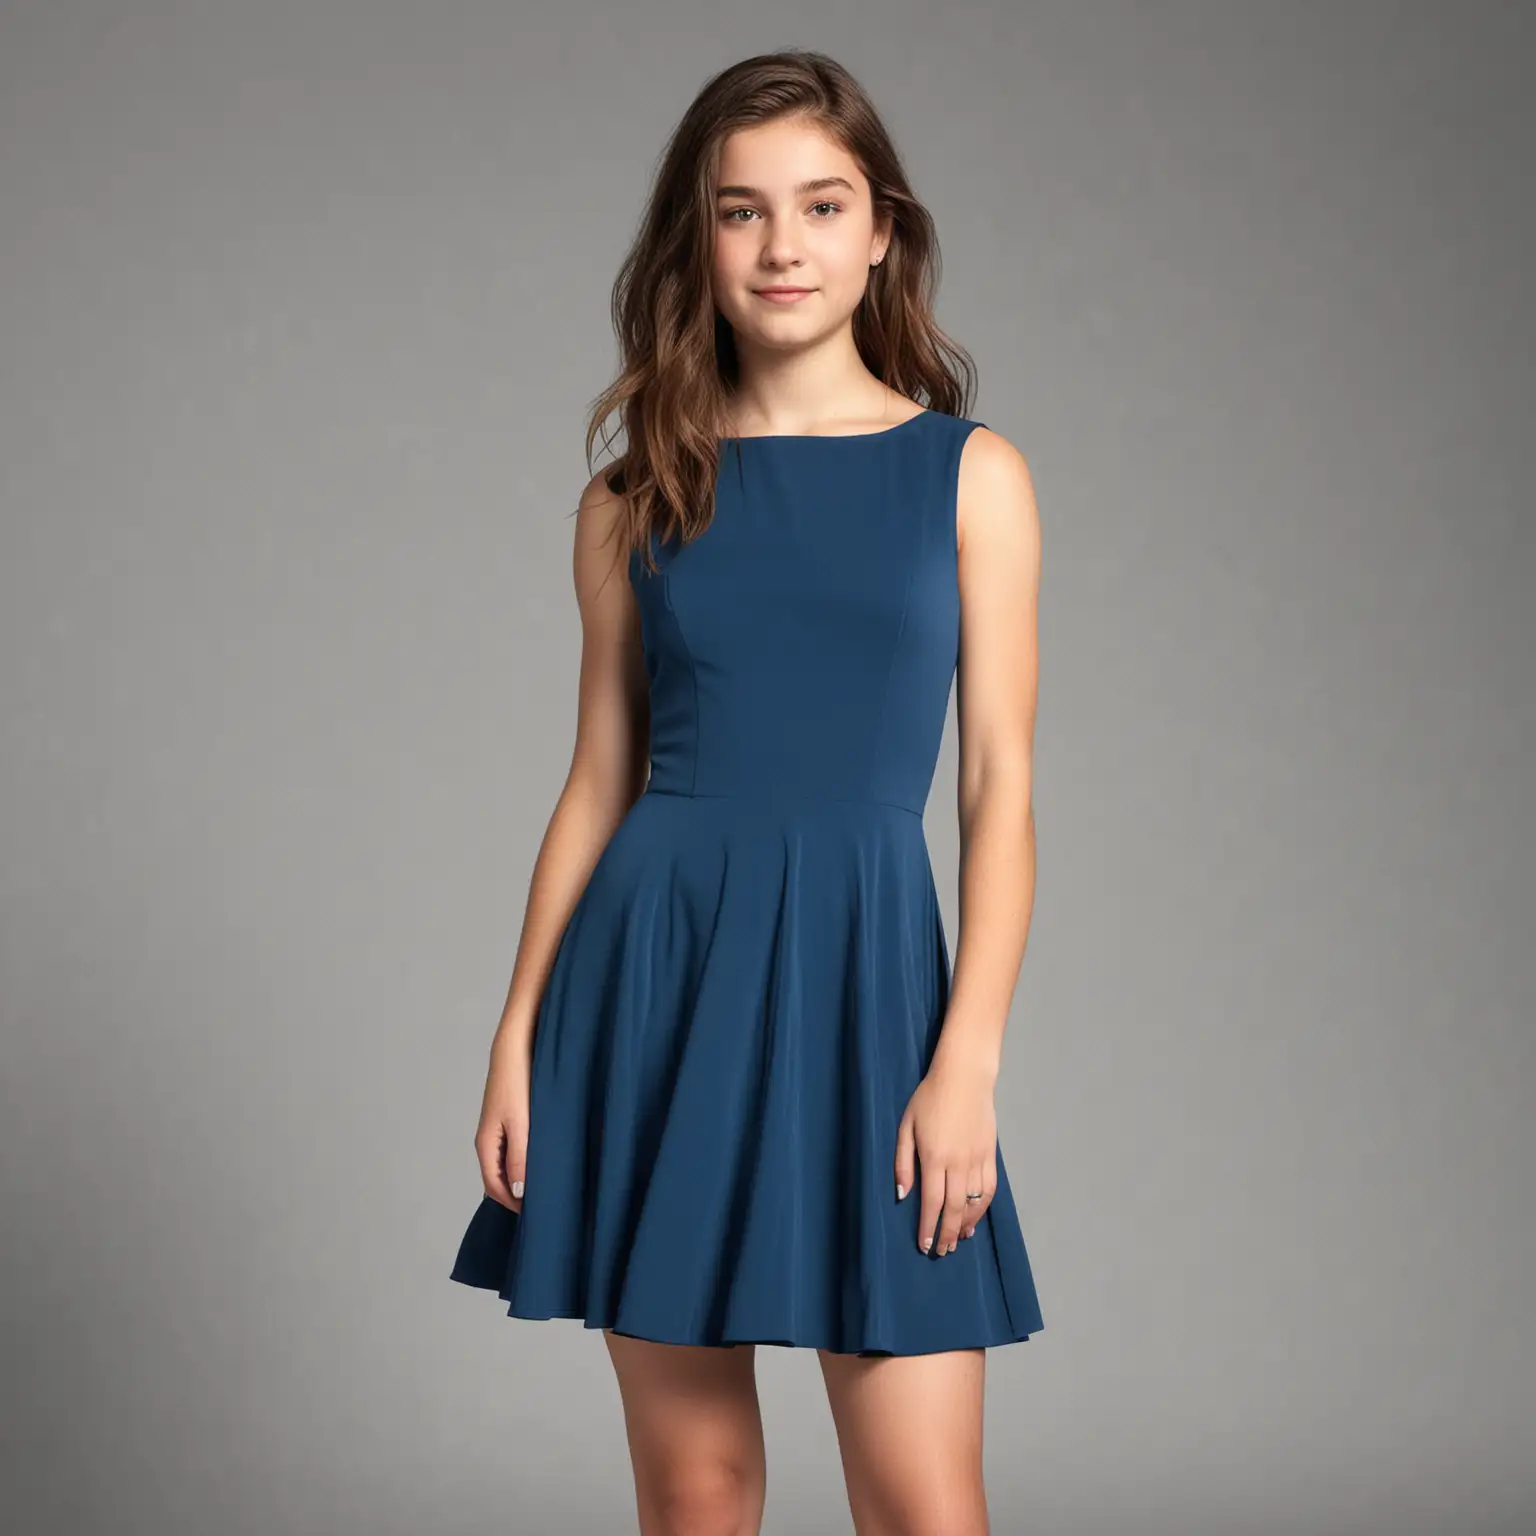 A 15-year-old girl wearing a short blue dress